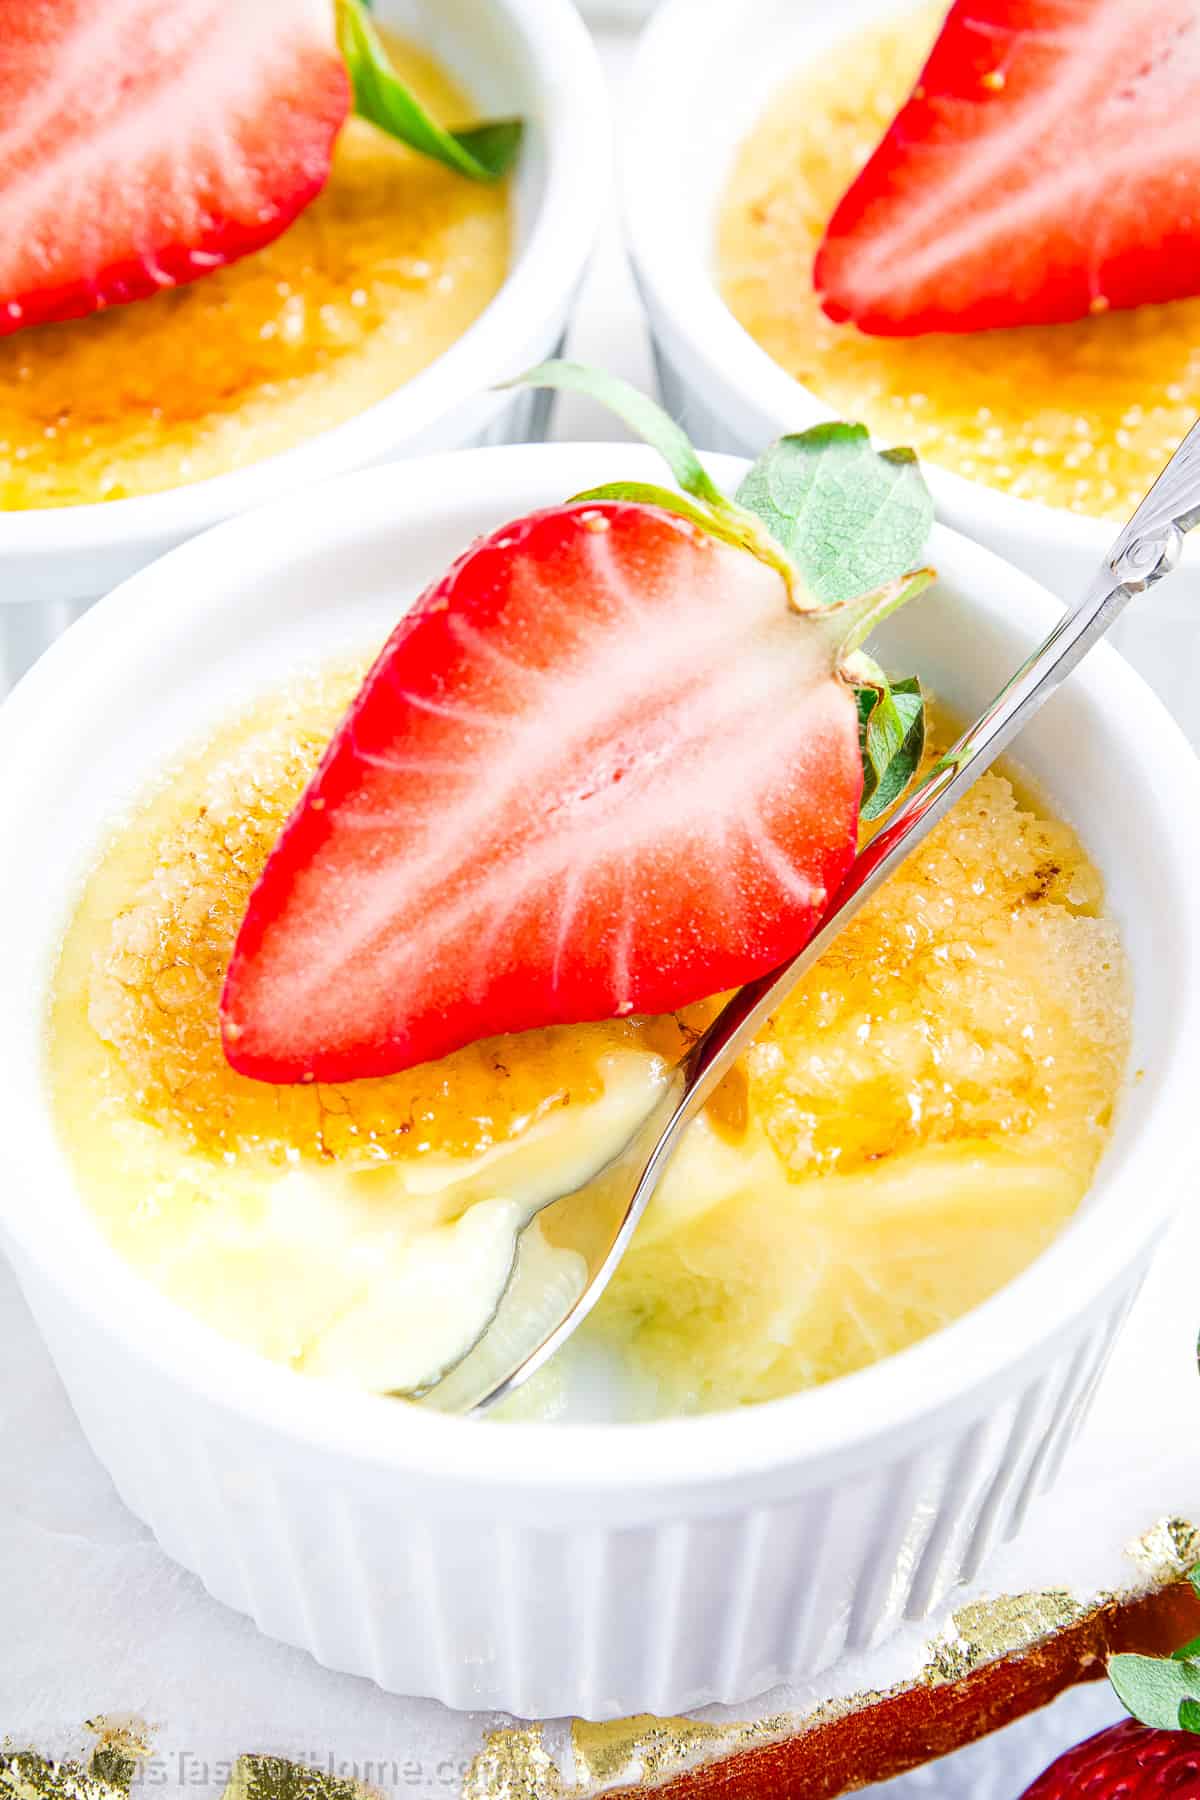 Vanilla bean creme brulee is a classic French dessert that is loved worldwide for its creamy texture and caramelized sugar crust. 